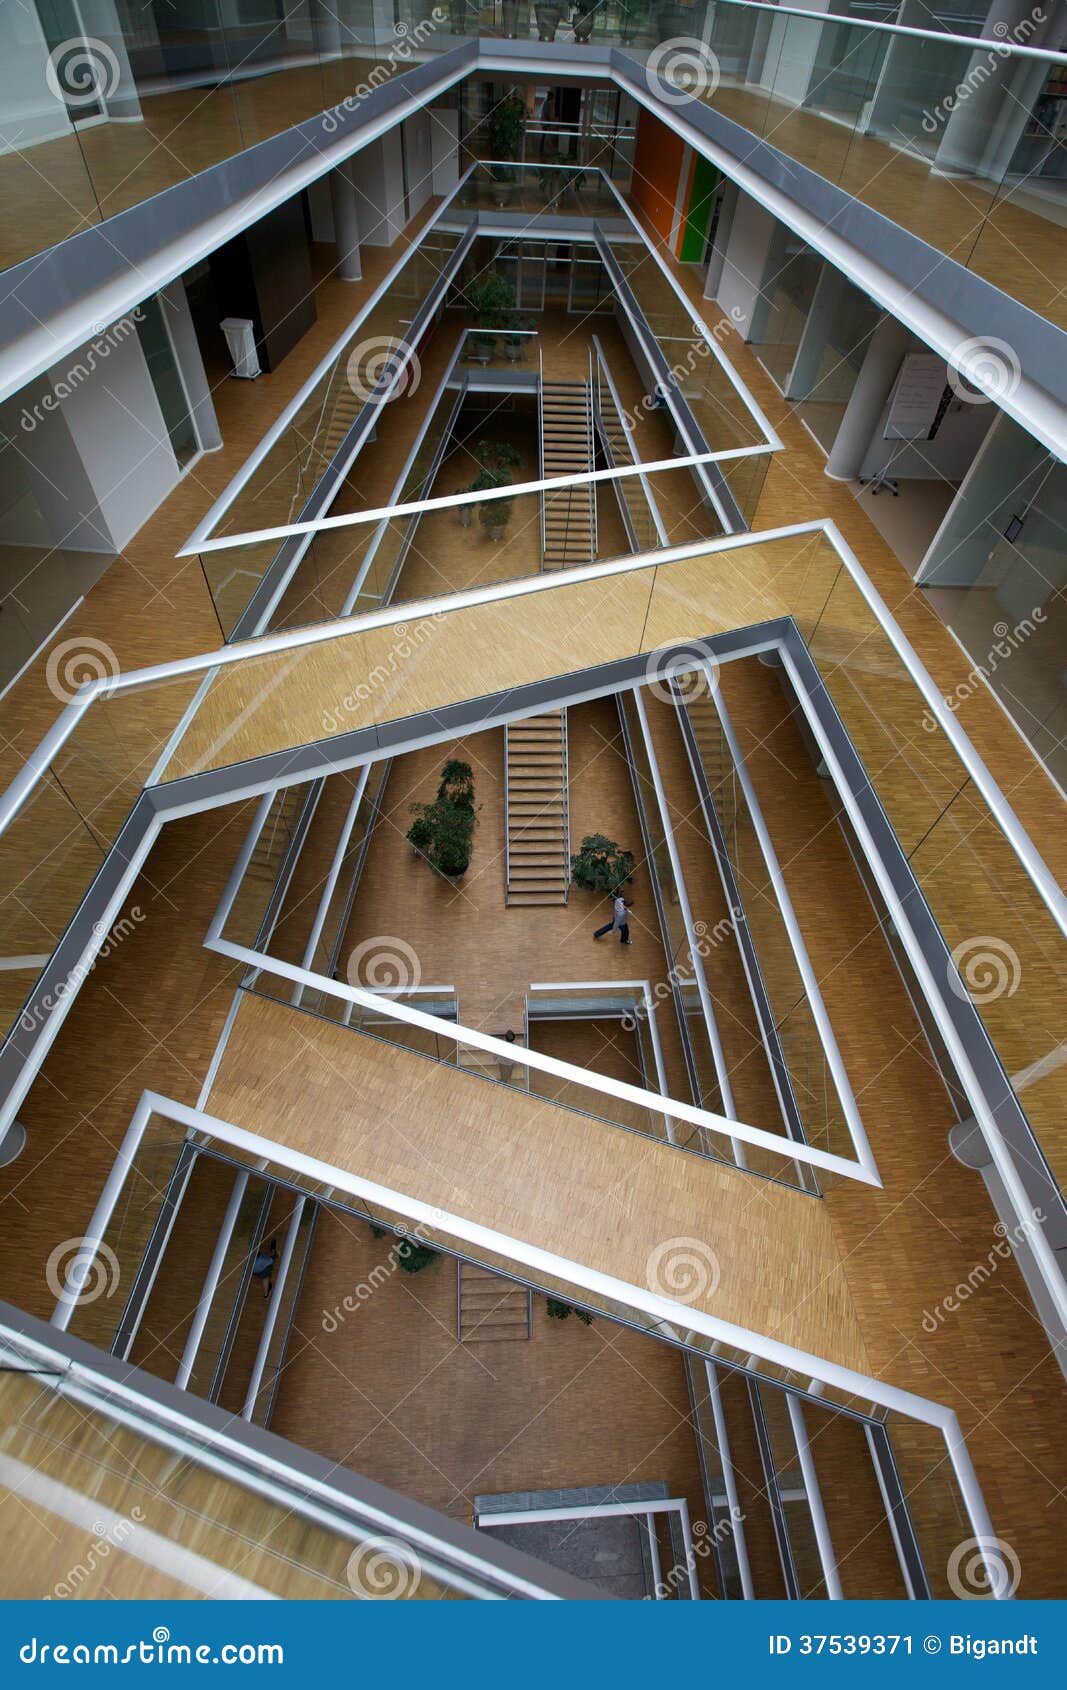 Office building interior stock image. Image of building - 37539371